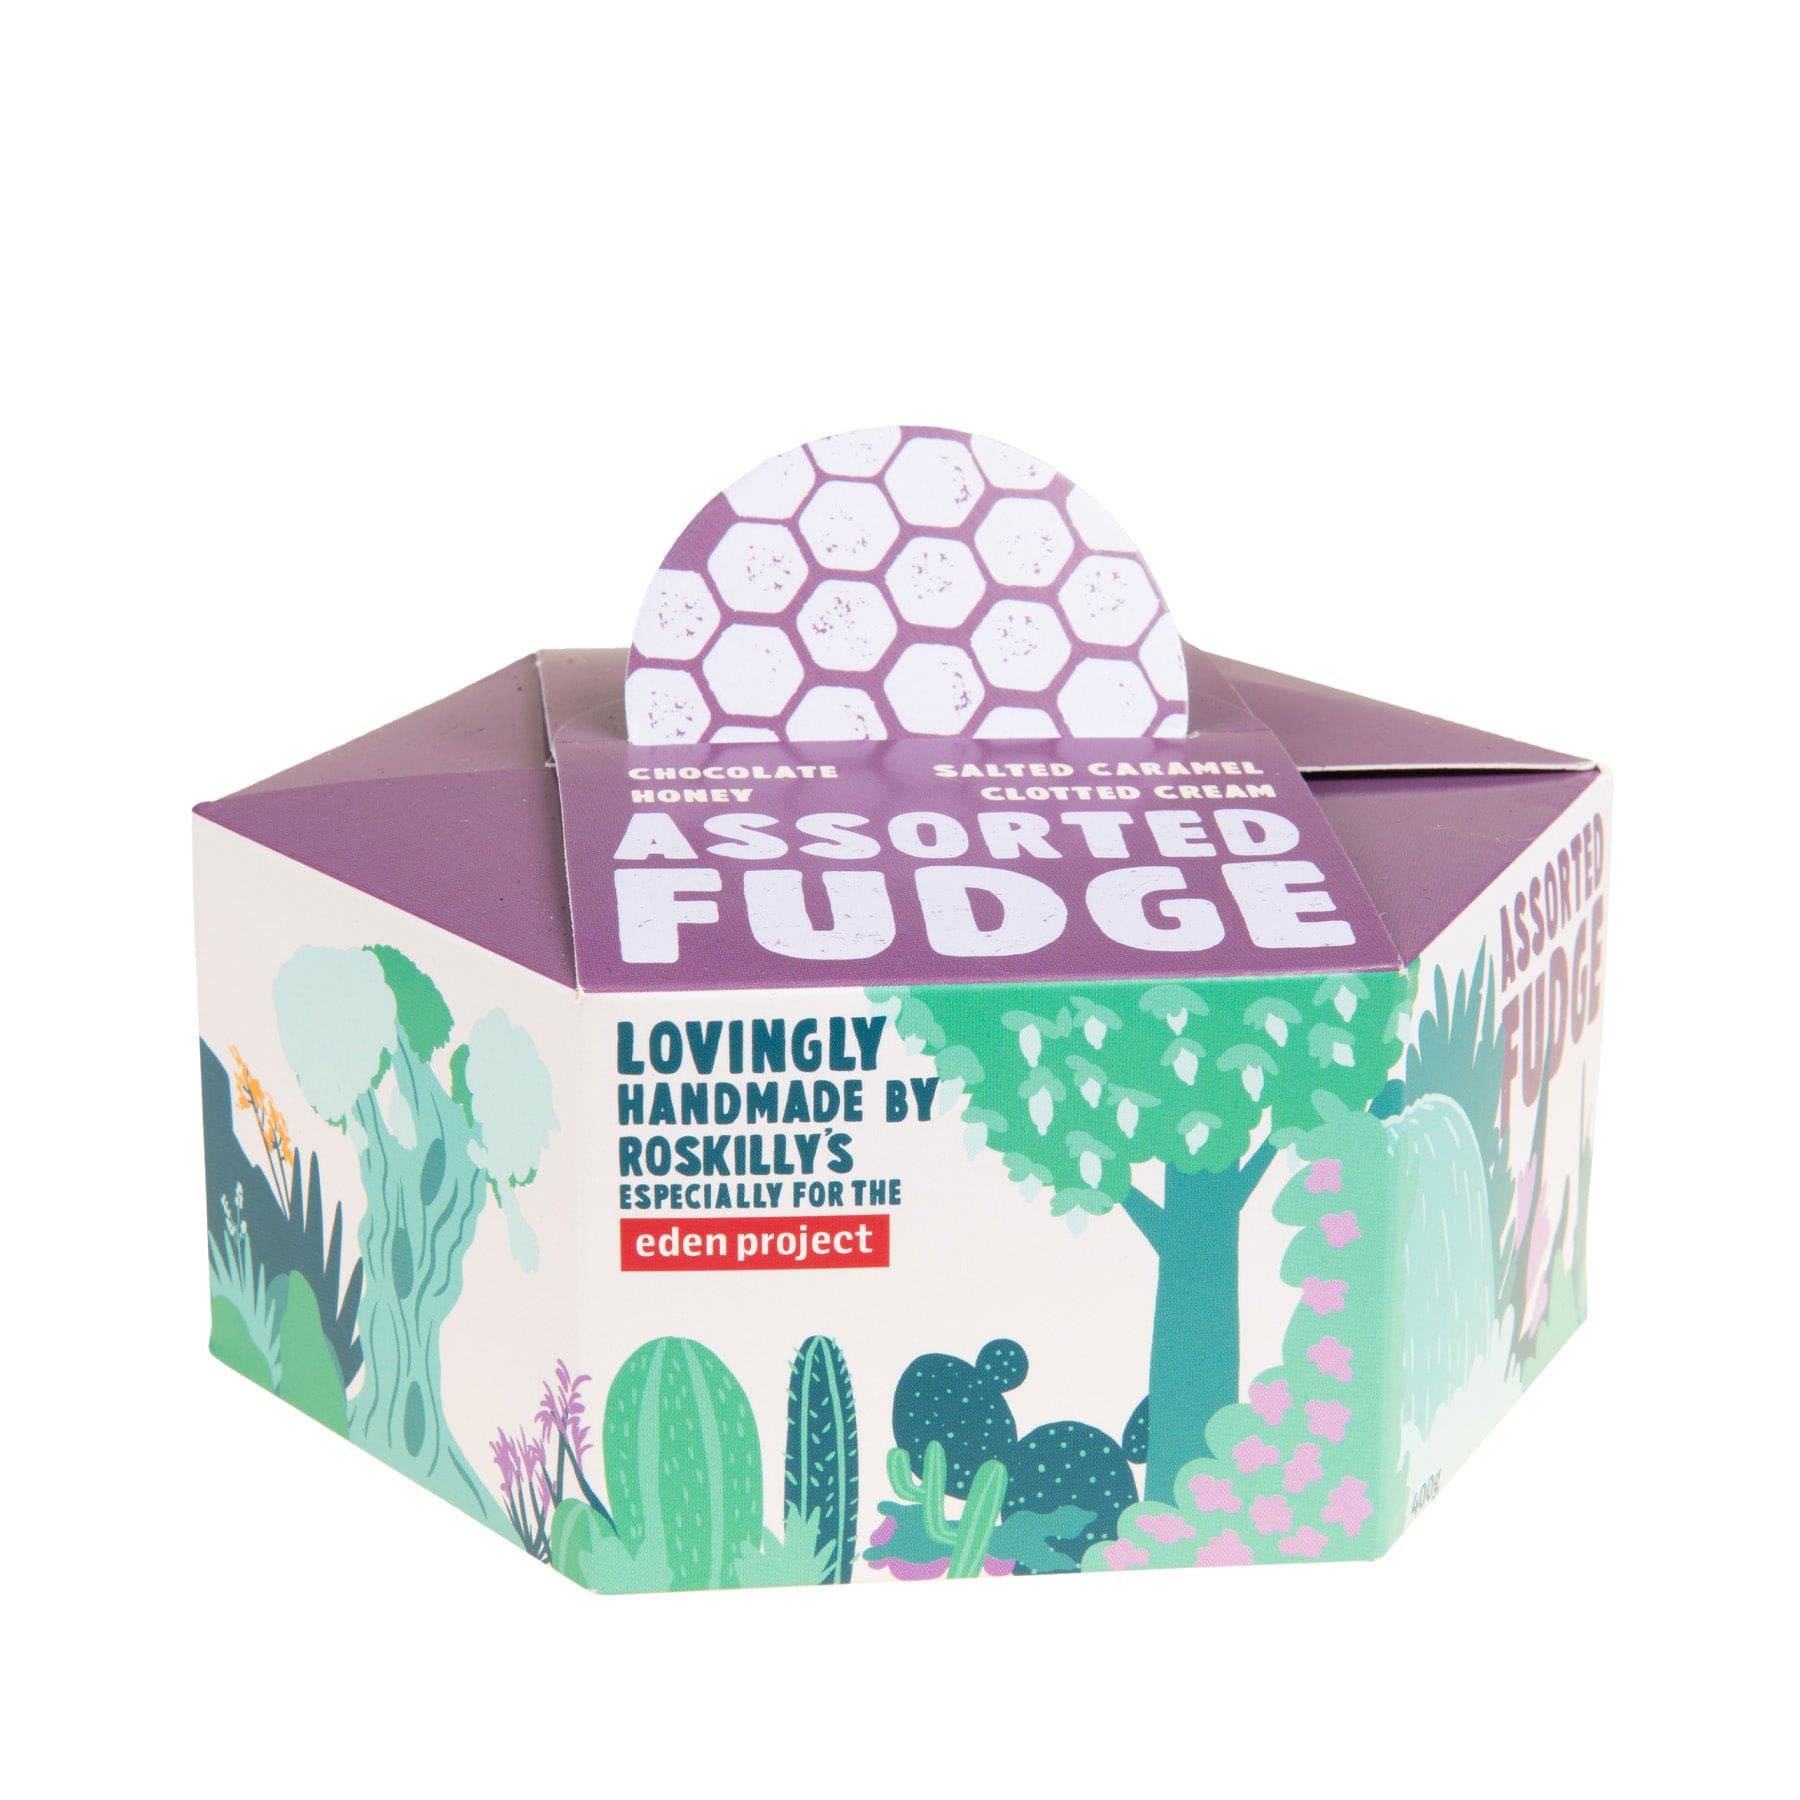 Assorted fudge packaging with honey, chocolate, clotted cream, and salted caramel flavors by Roskilly's for the Eden Project, displaying a cactus garden design